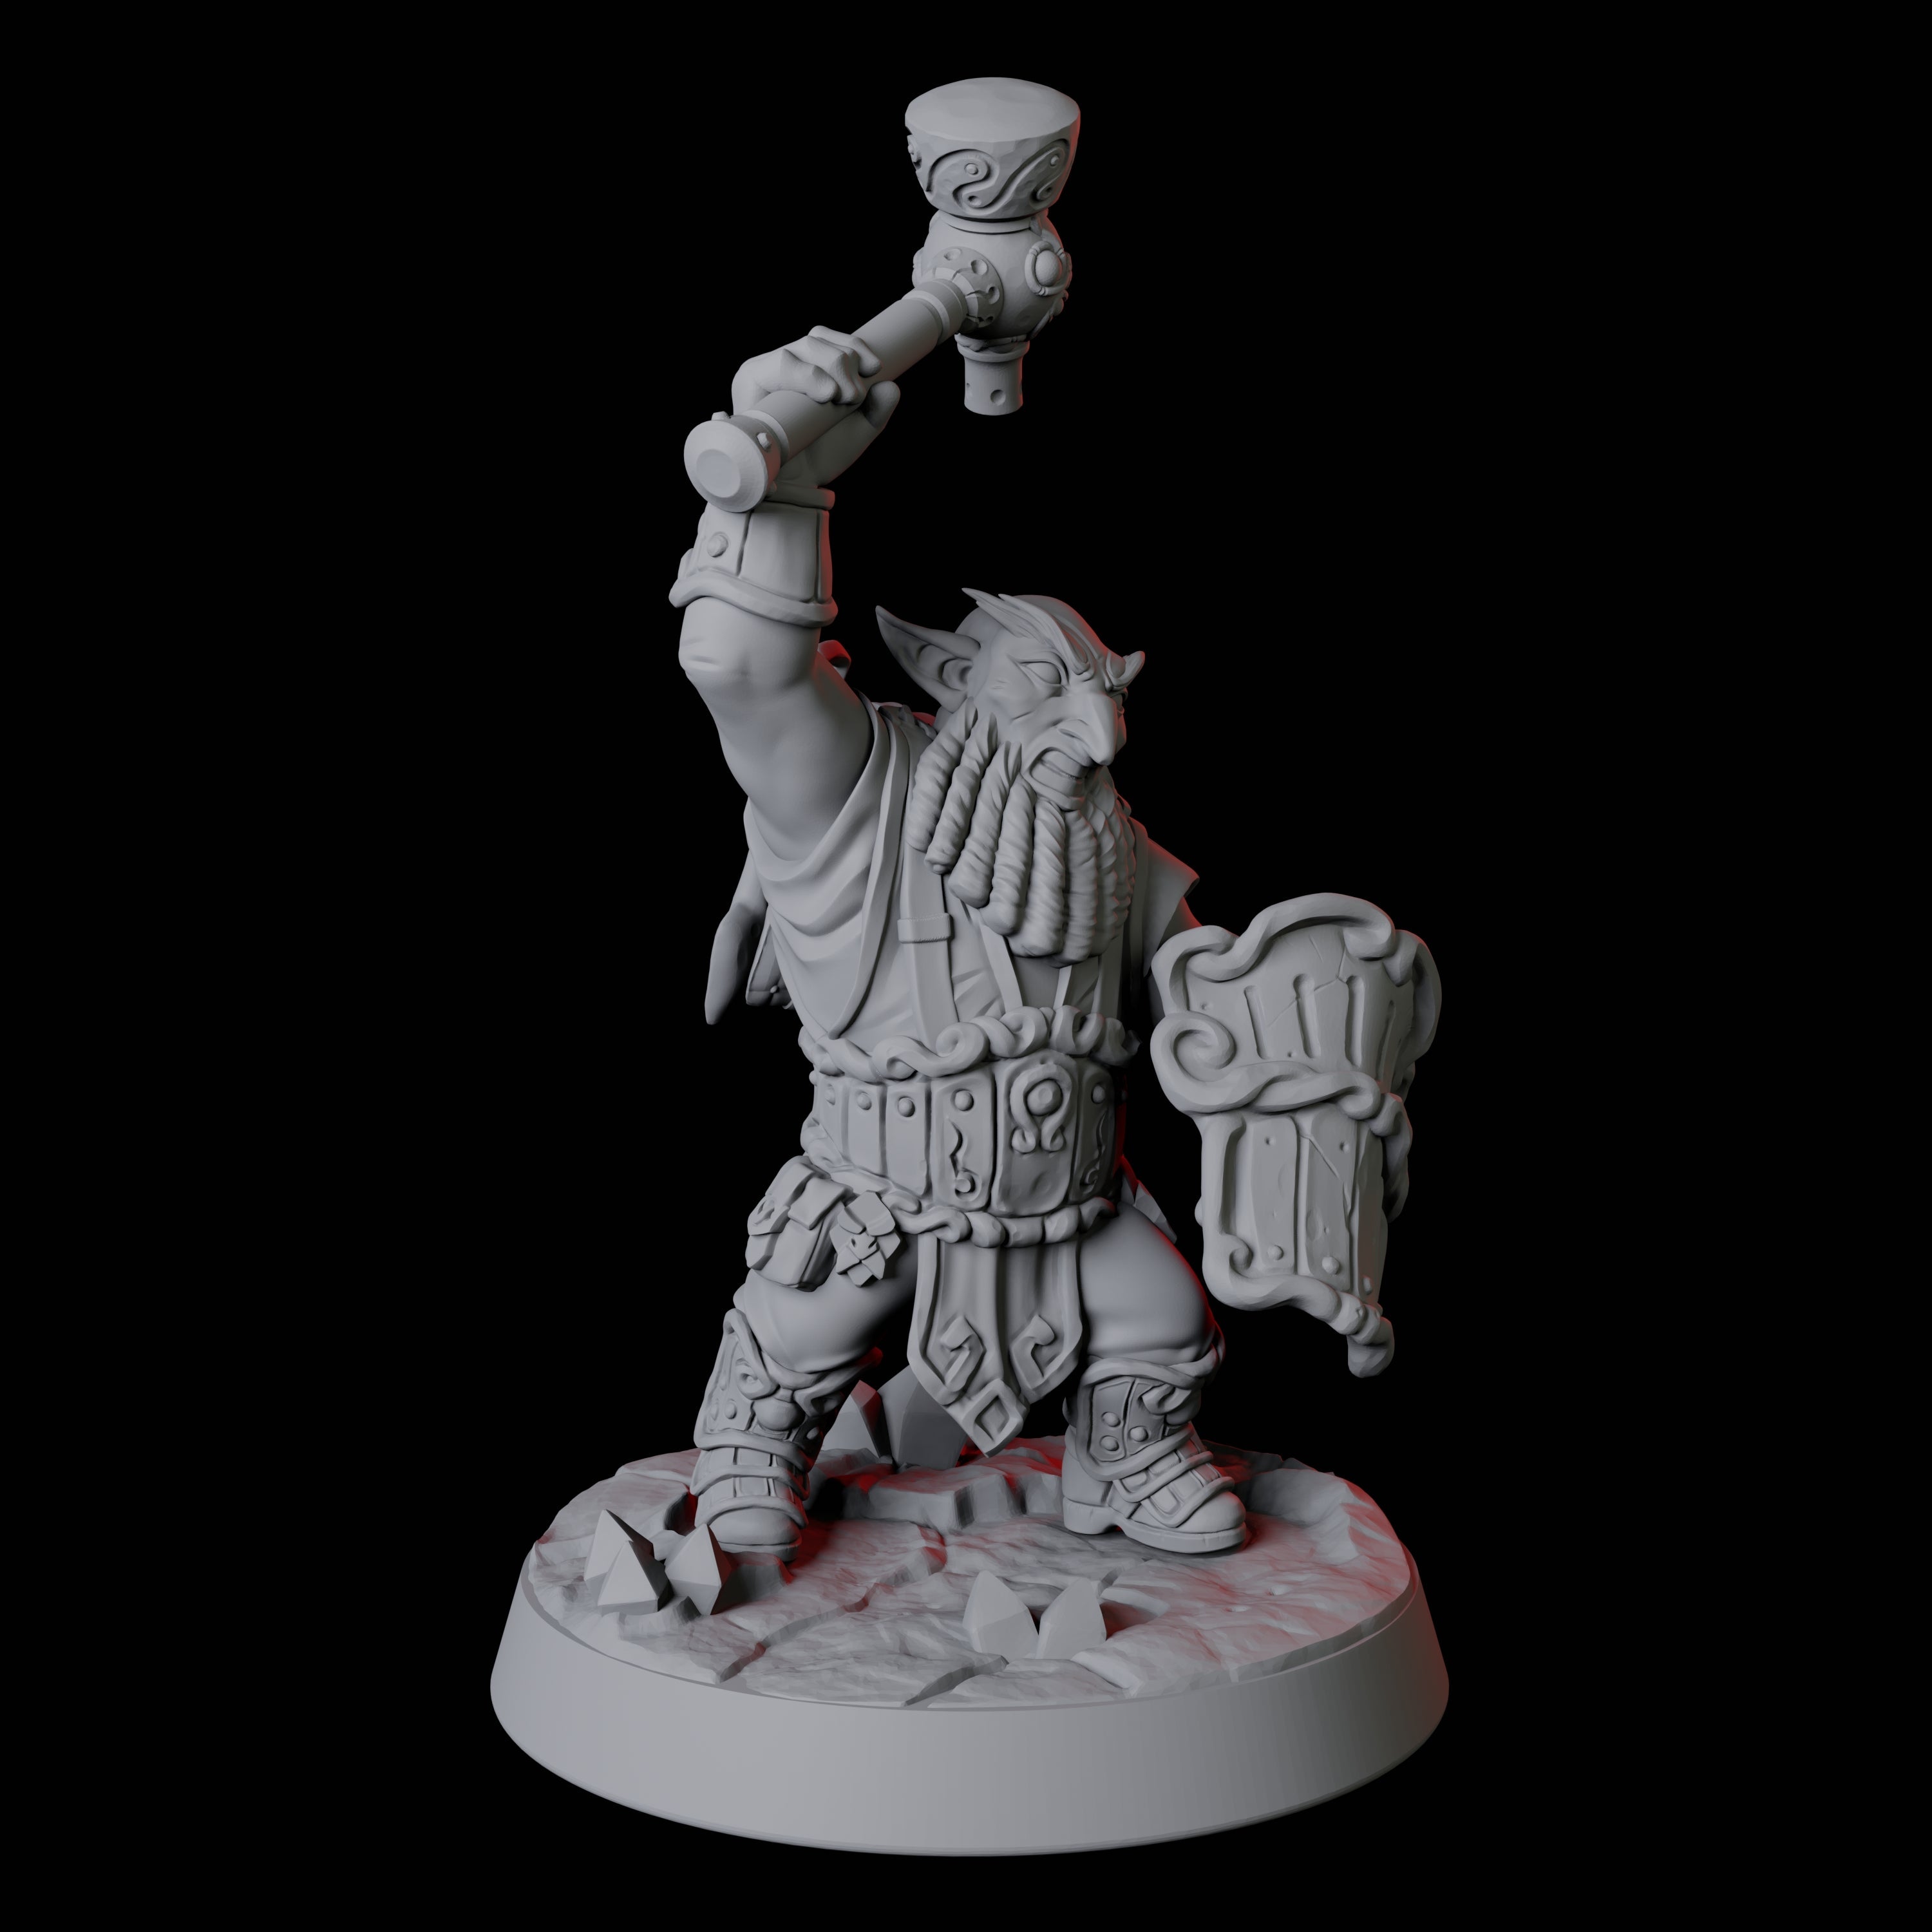 Gnome Miner C Miniature for Dungeons and Dragons, Pathfinder or other TTRPGs